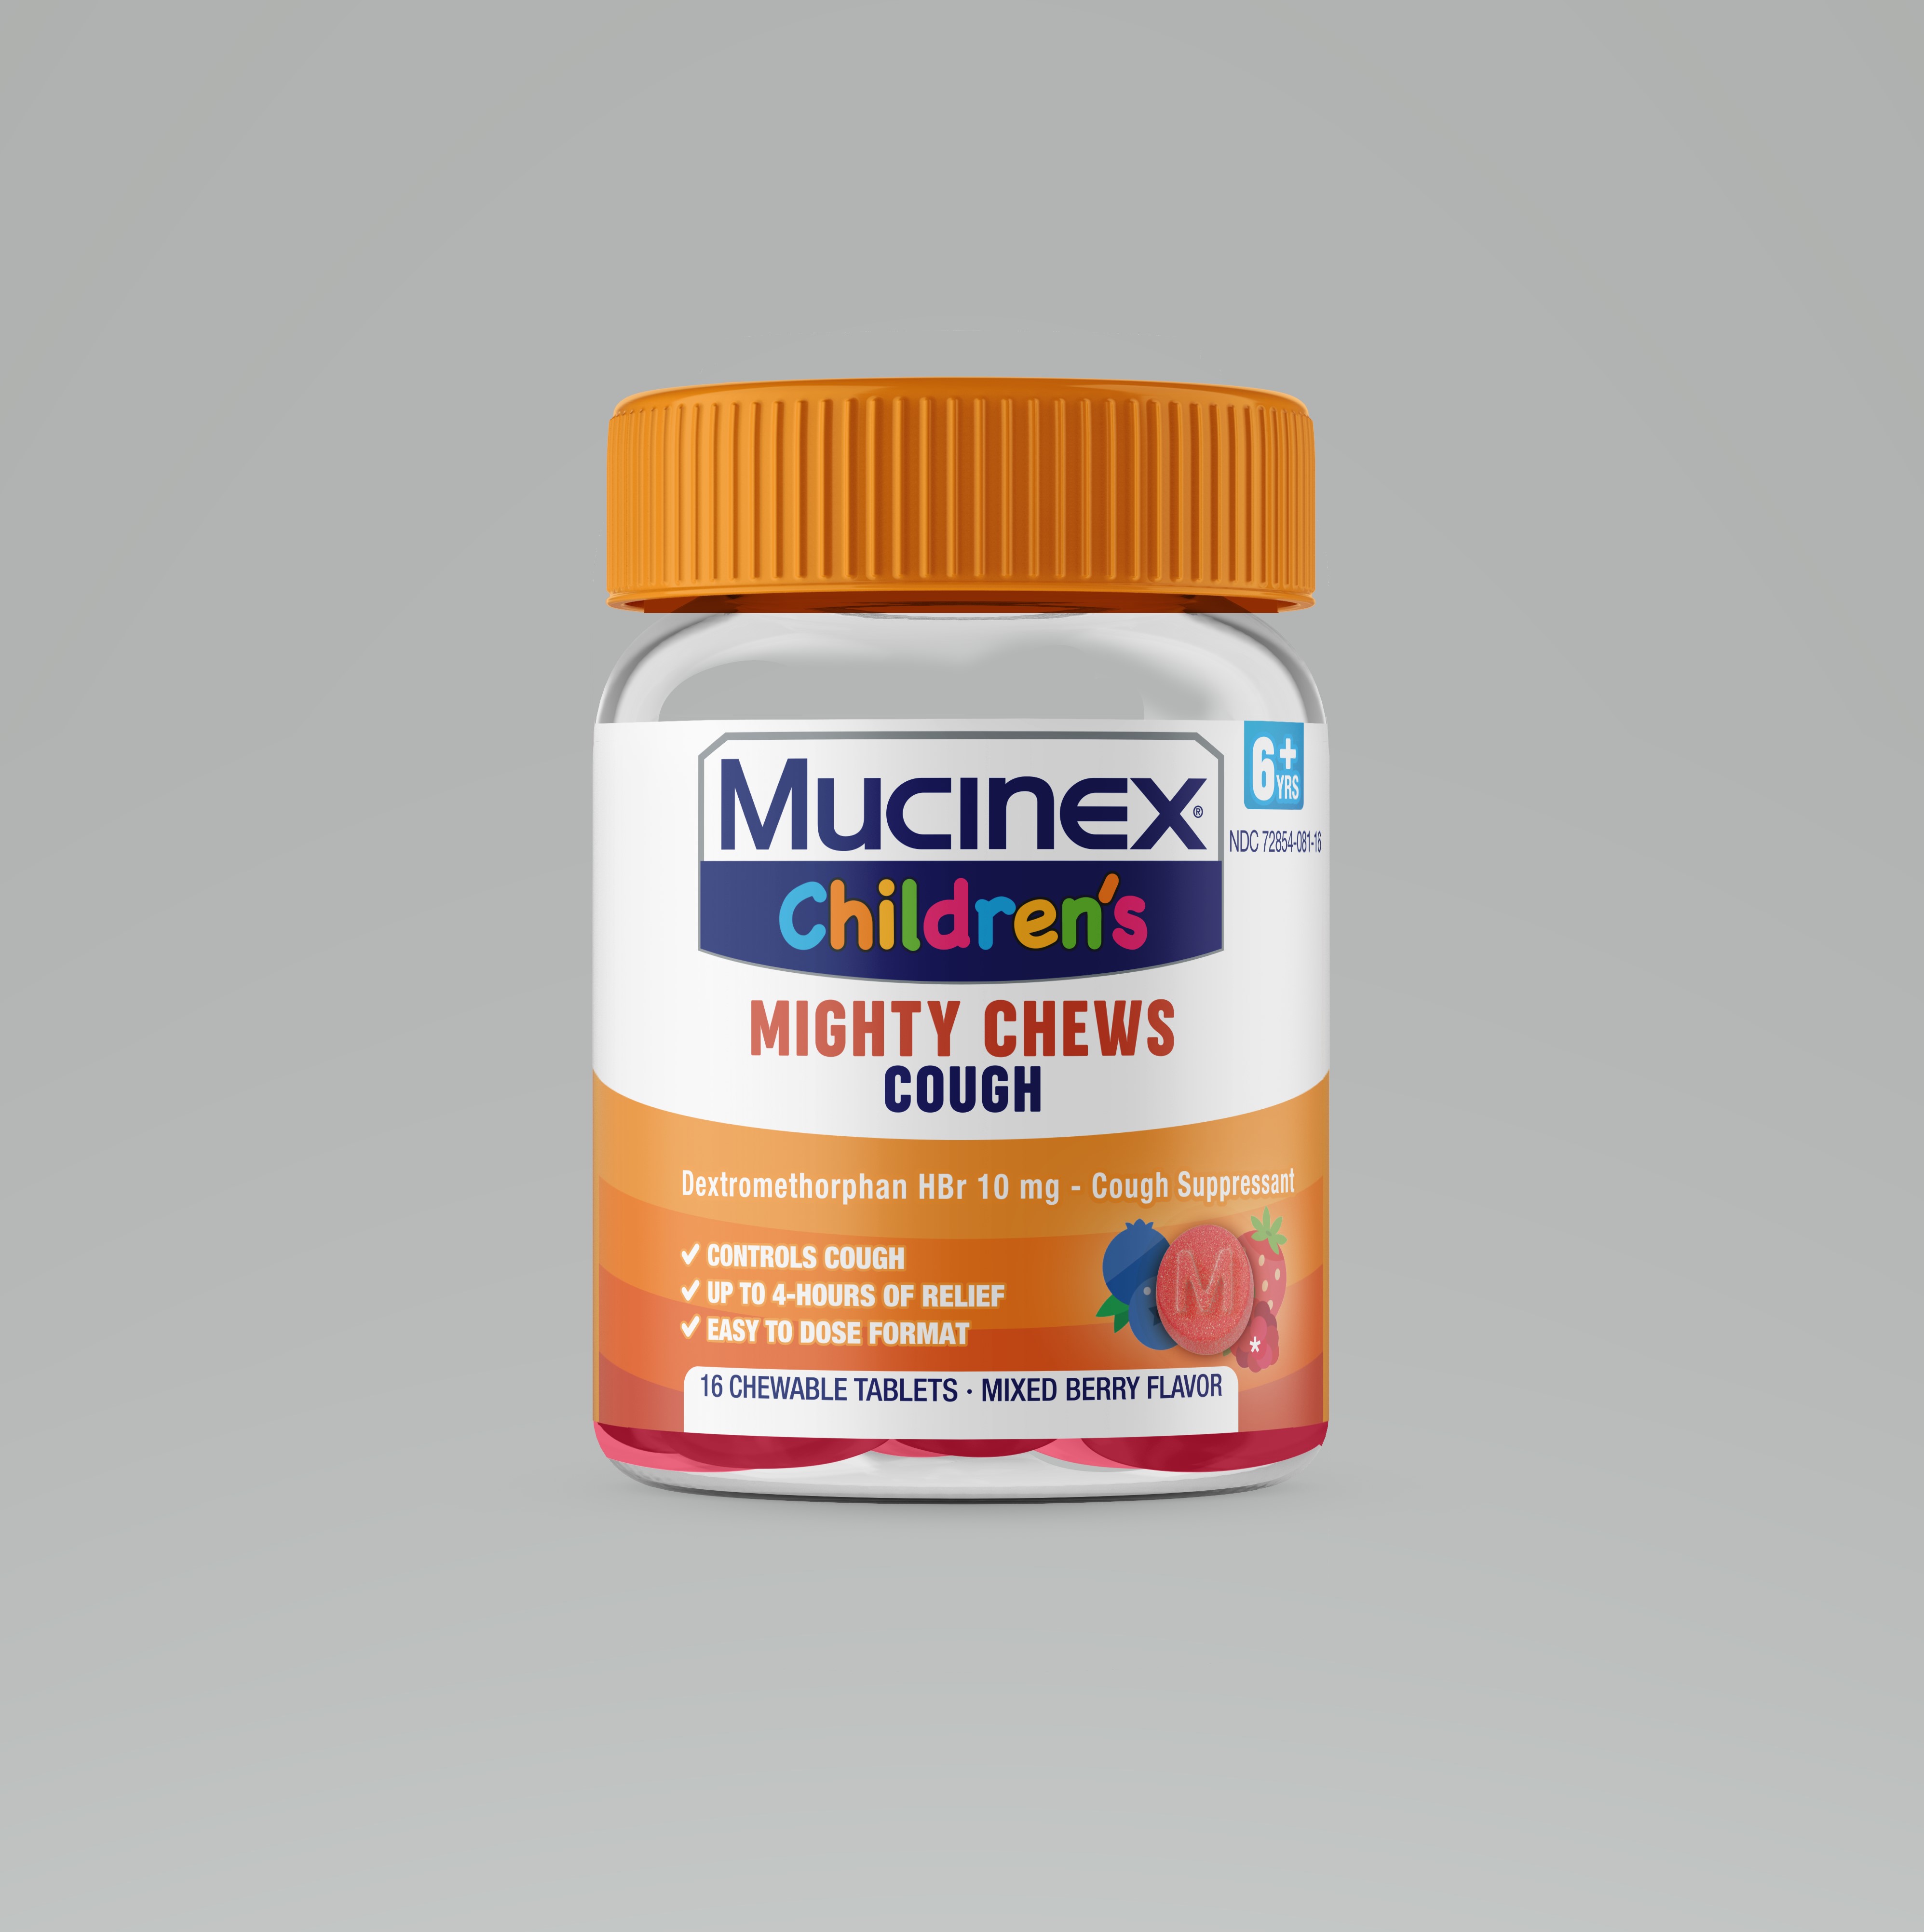 MUCINEX Childrens Mighty Chews  Cough  Mixed Berry Flavor